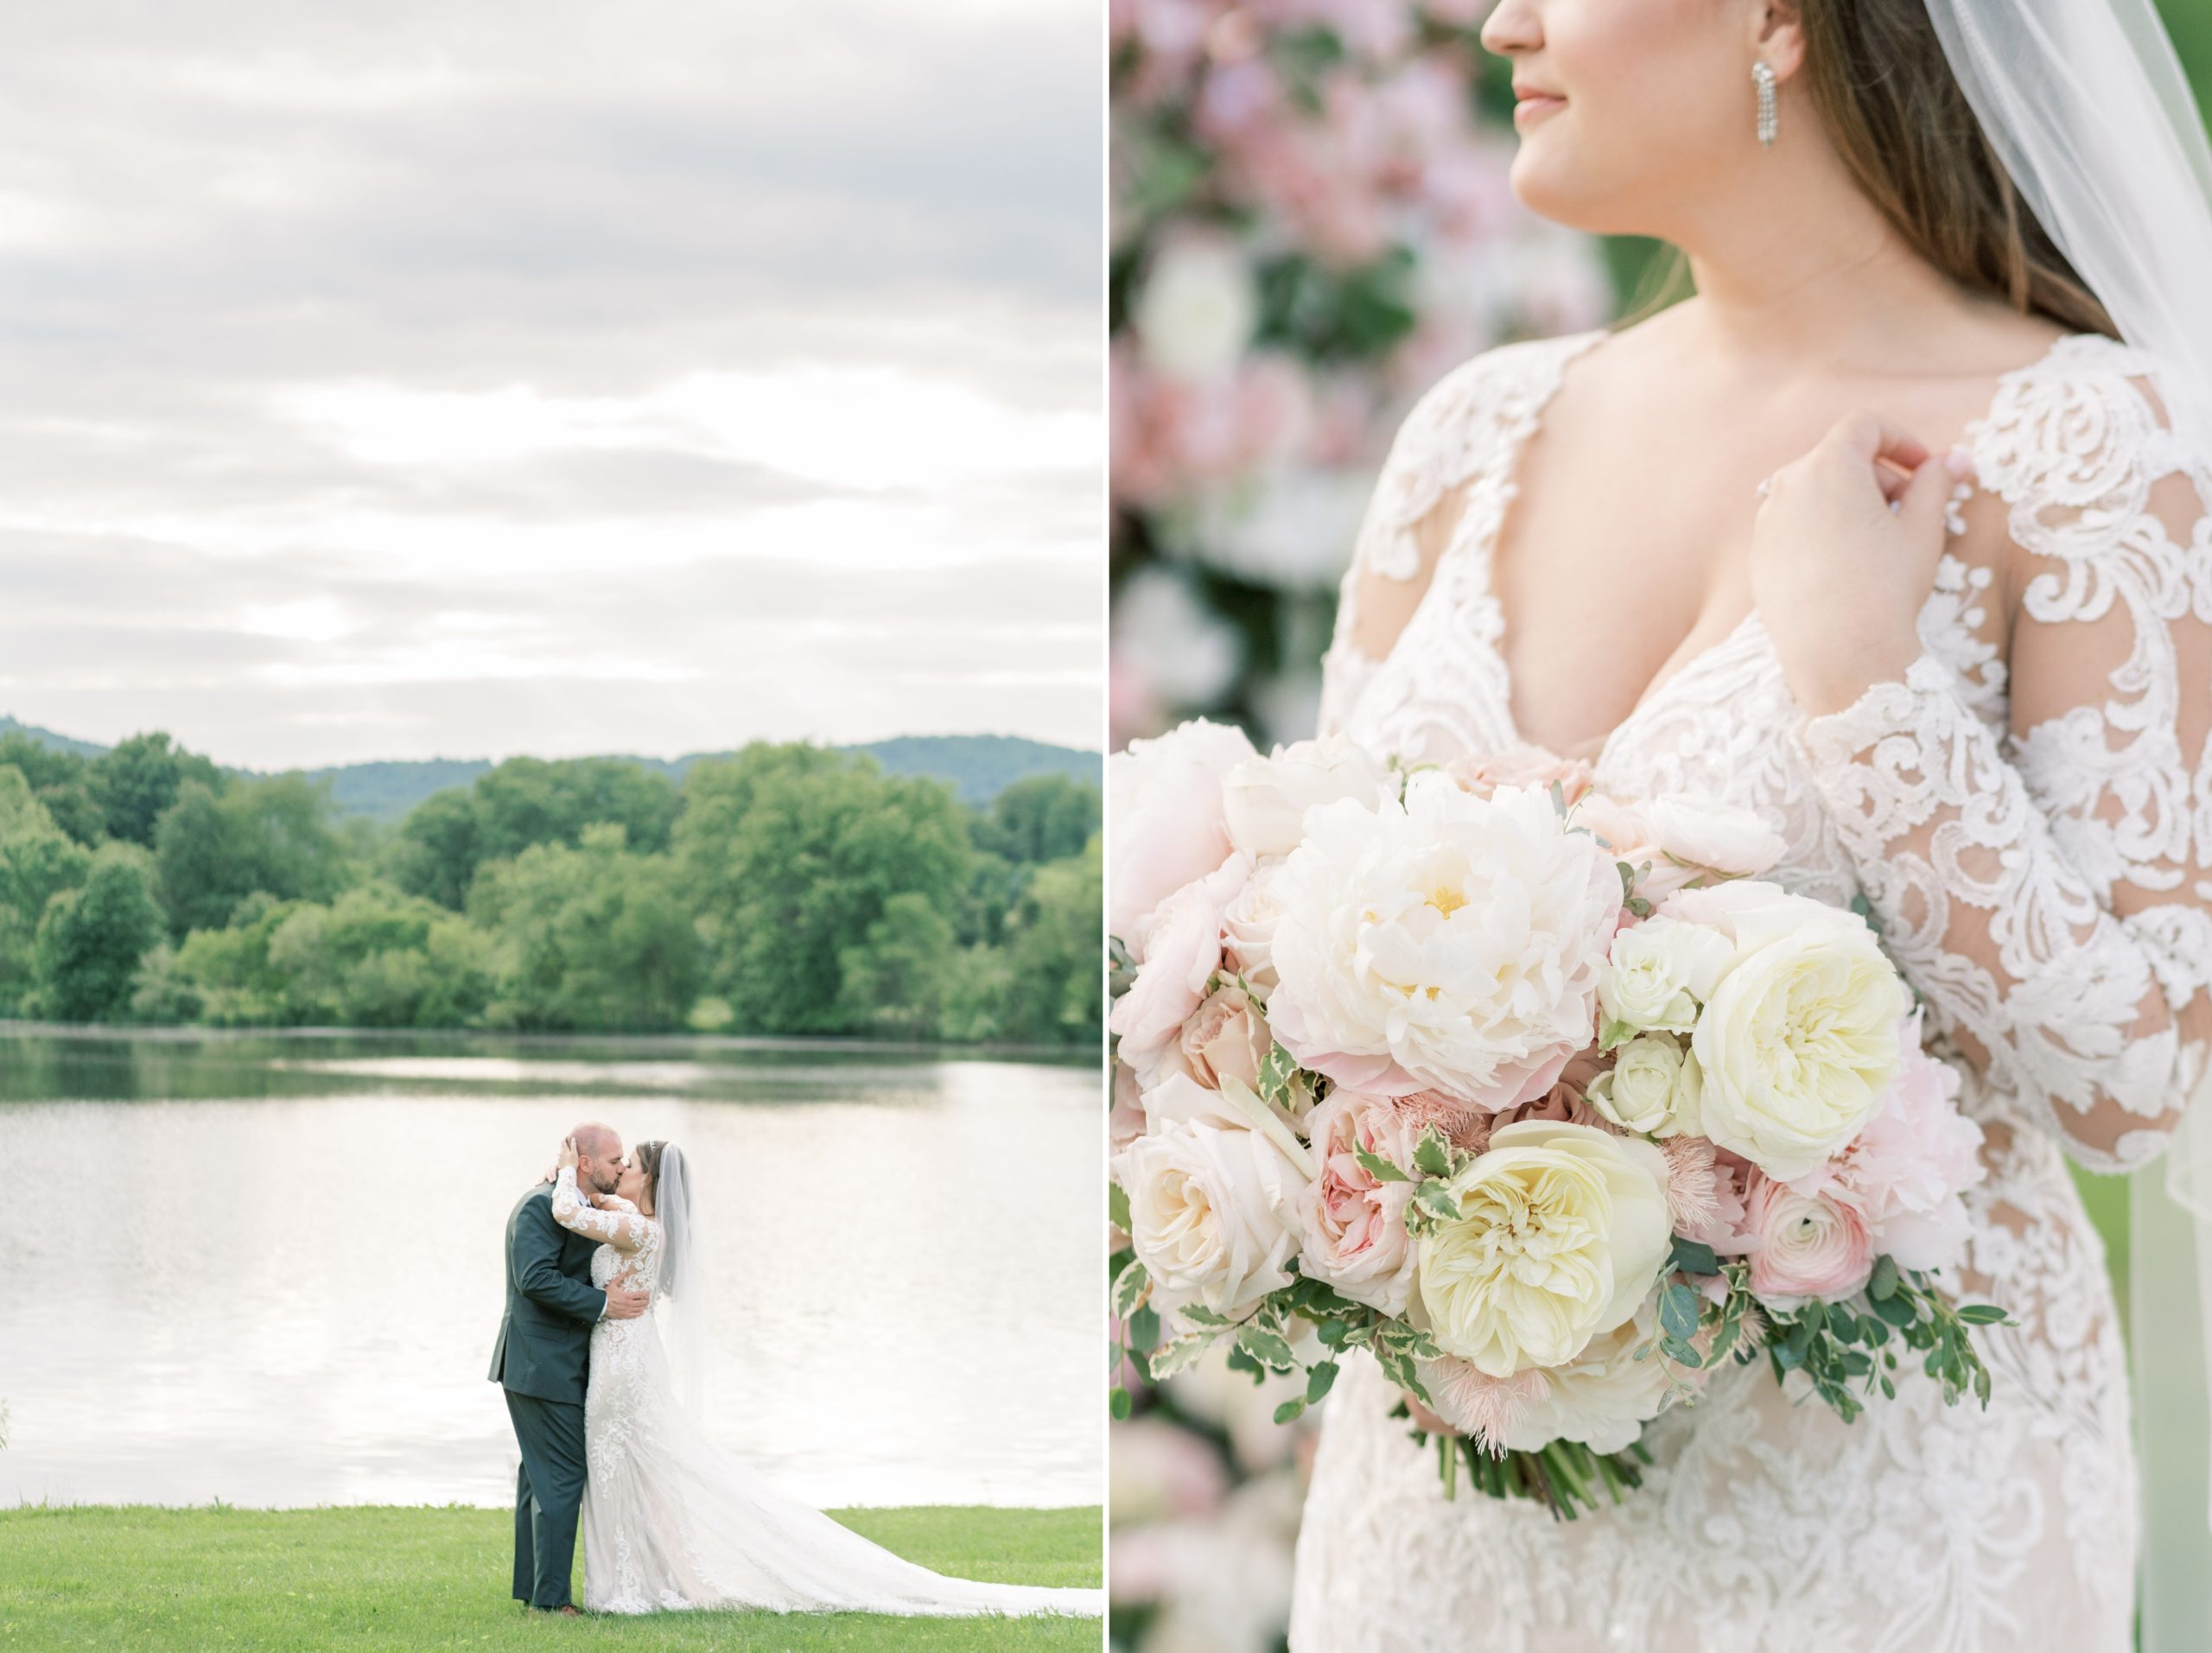 A stunning, floral-focused wedding at a private estate in the Blue Ridge Mountains in The Plains, Virginia.